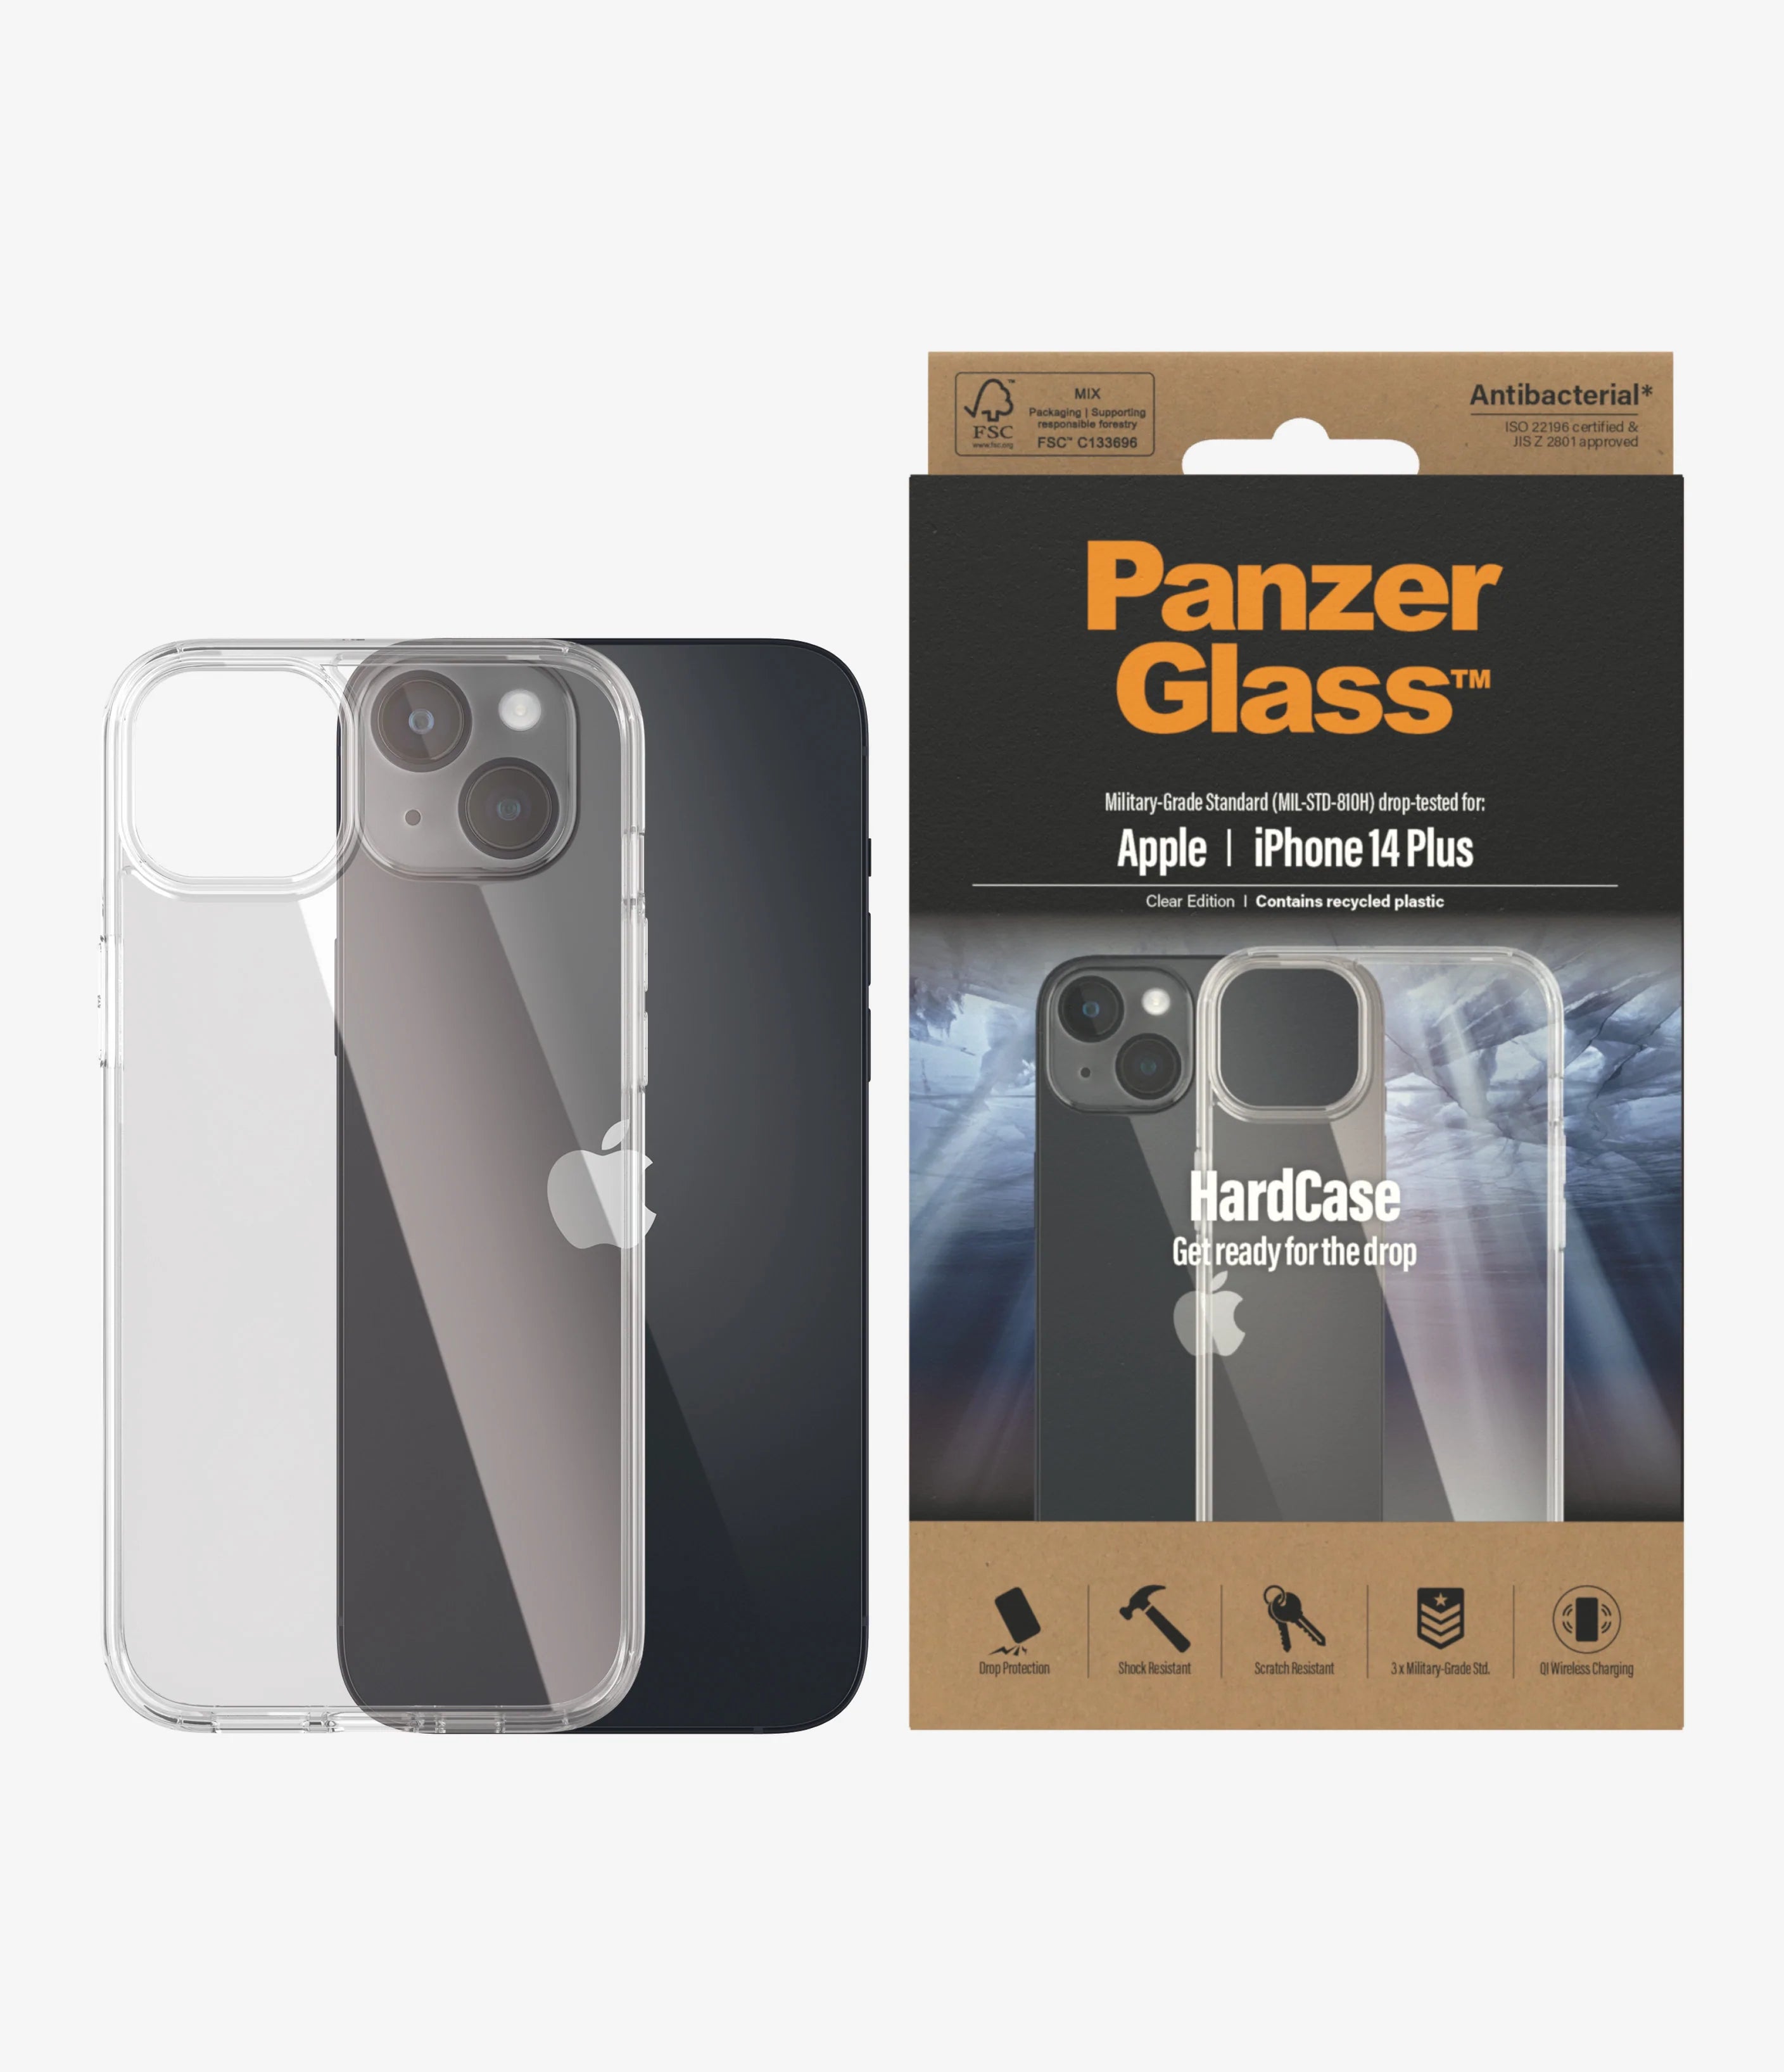 PanzerGlass HardCase Clear Case for iPhone 14 Plus